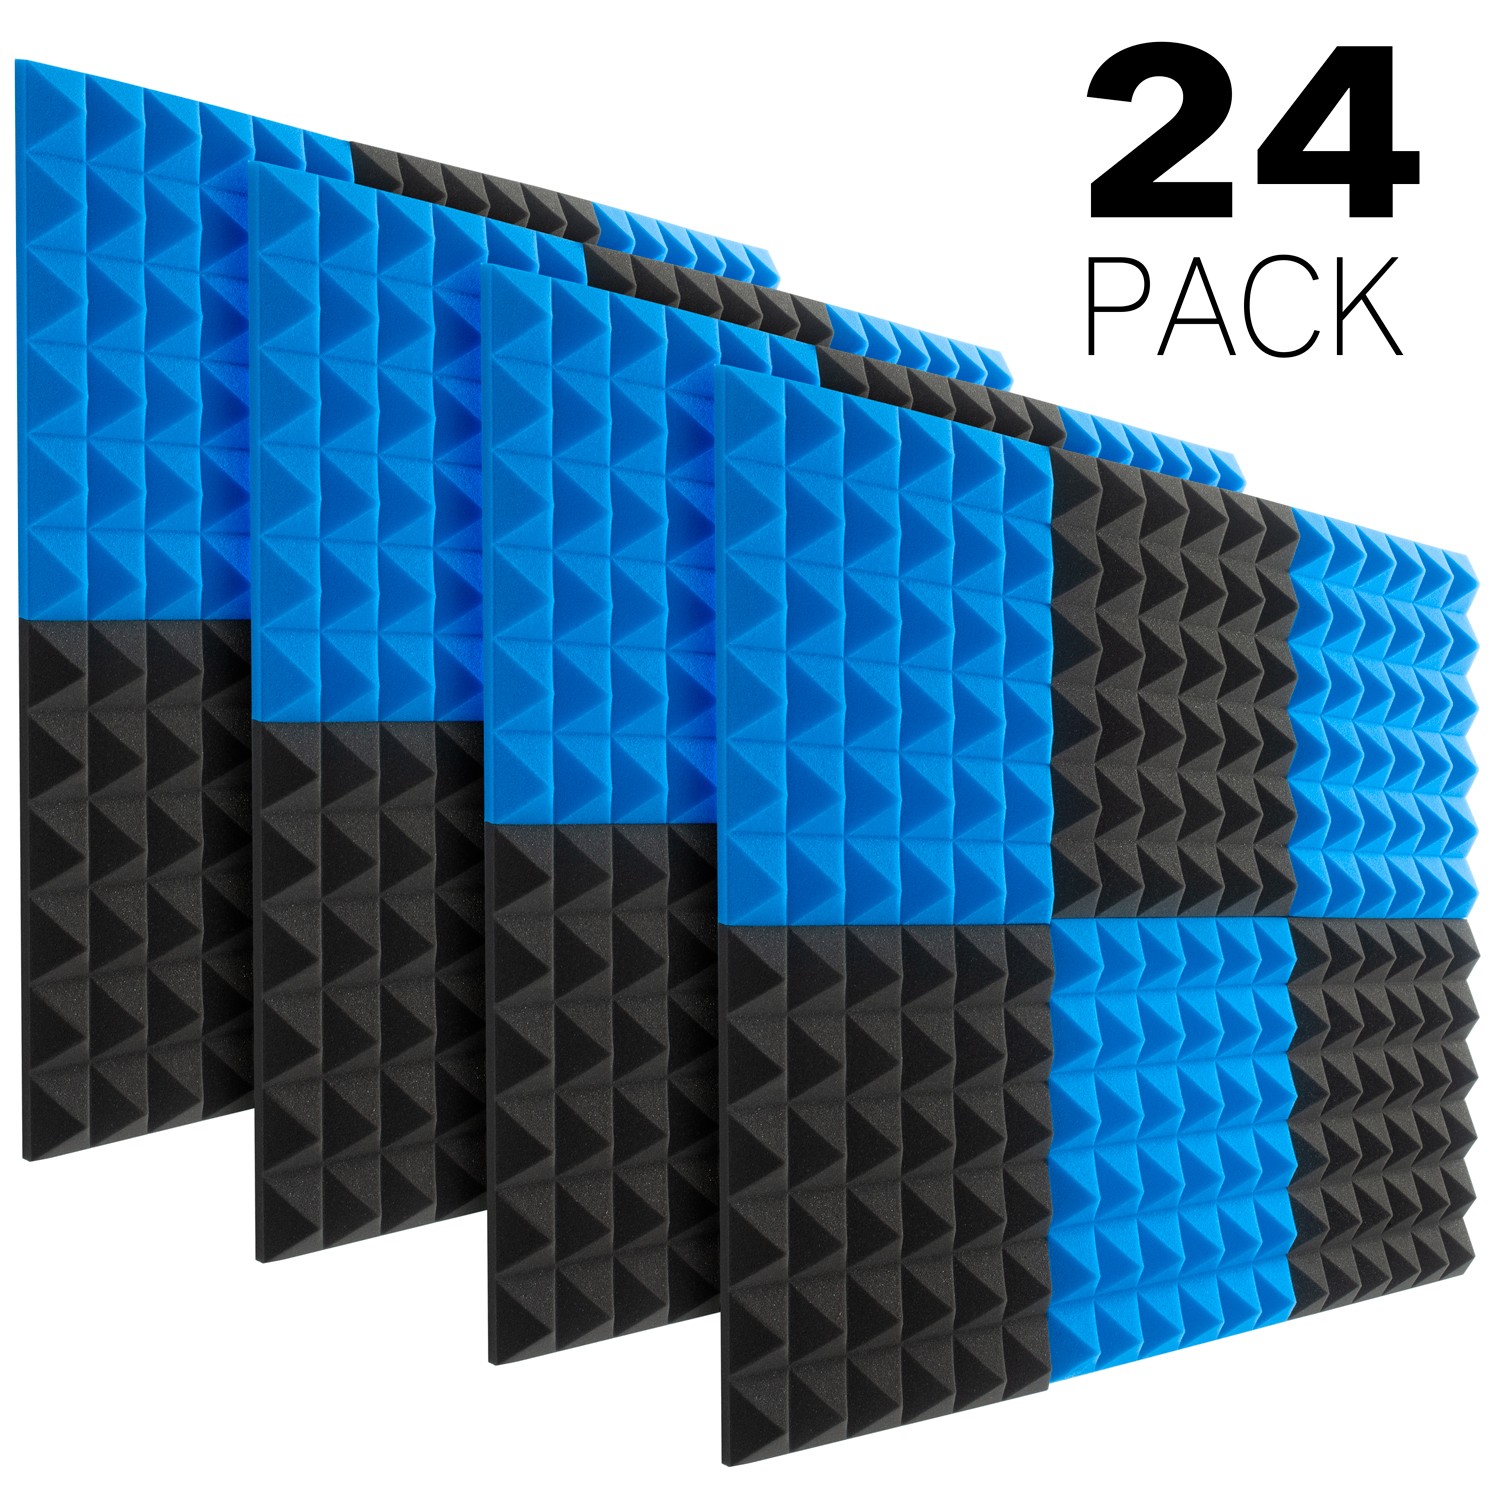 12 Pack Acoustic Panels Studio Soundproofing Foam Wedges Wall Foam Tiles  Sound Proof Sound Insulation Absorbing 12 X 12 X 1